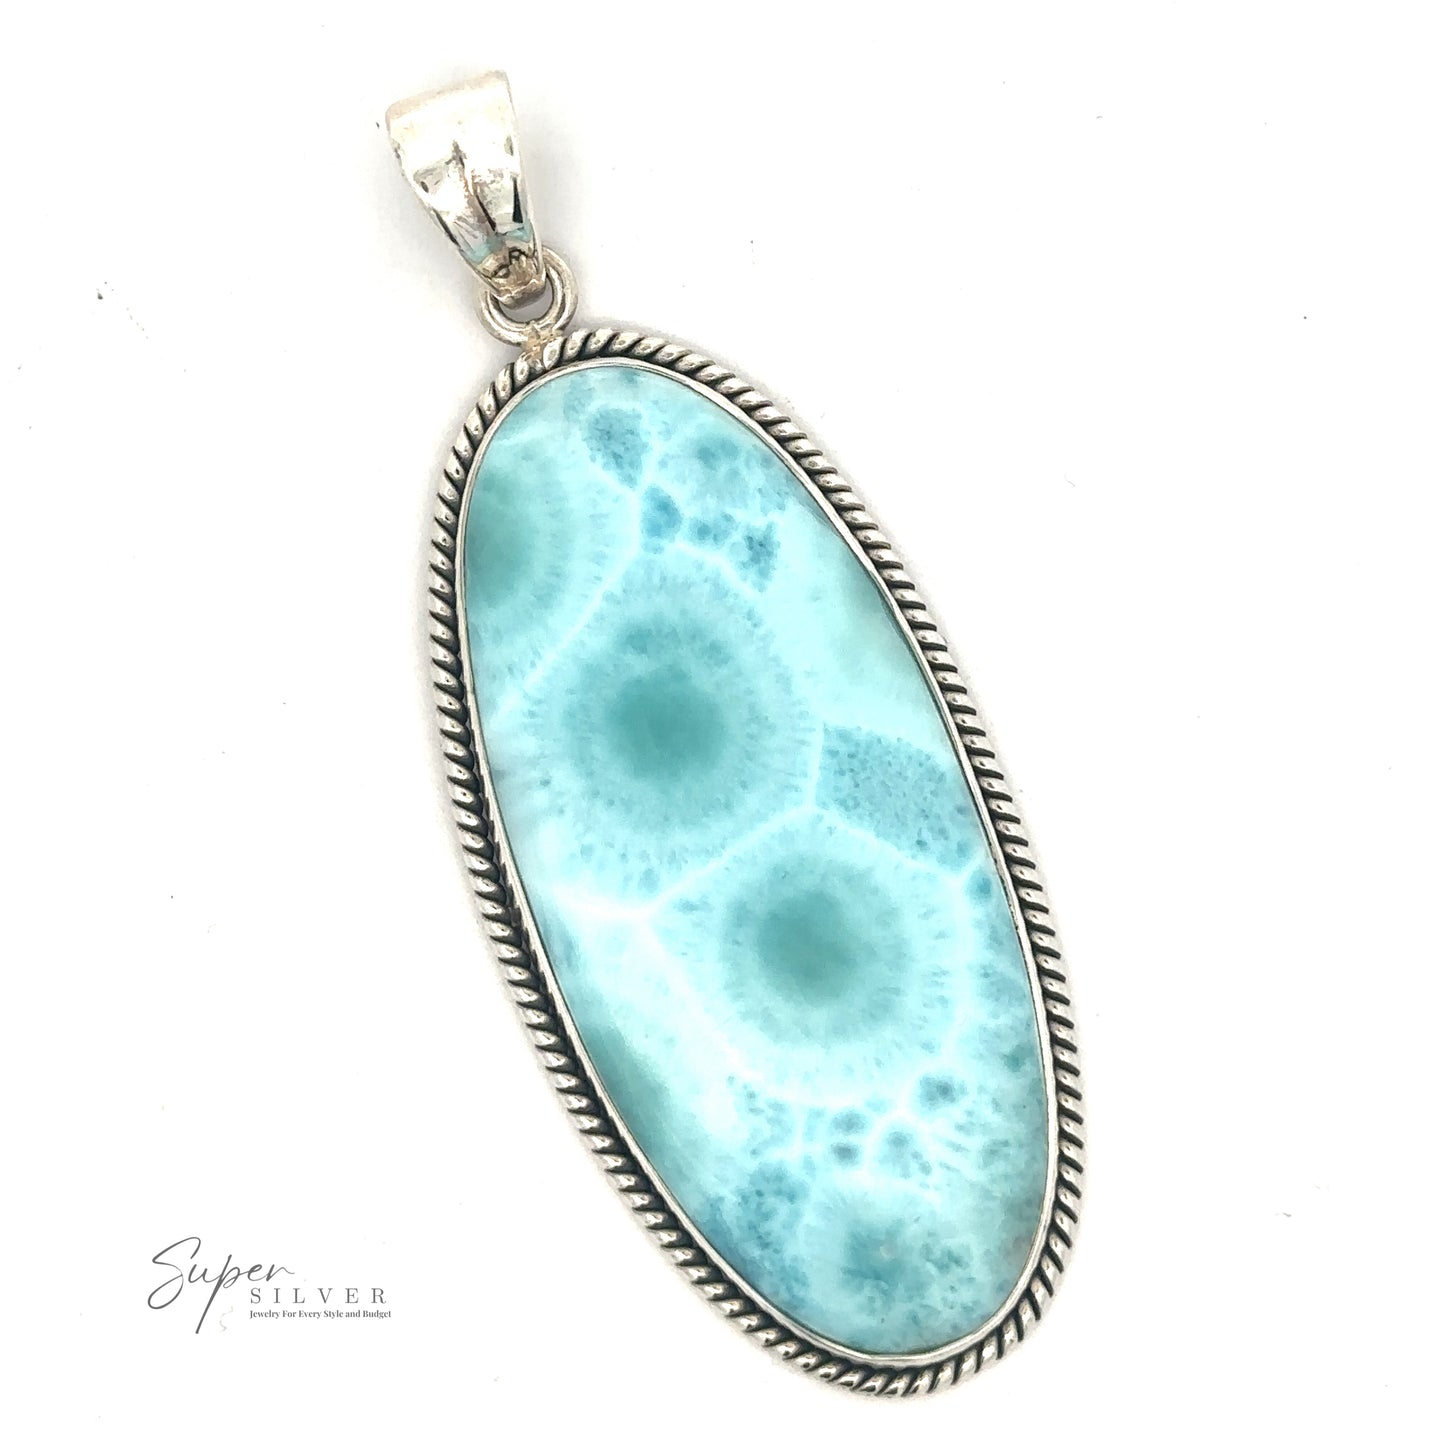 
                  
                    A 27x71mm silver pendant featuring an elongated oval-shaped blue gemstone with an intricate pattern, bordered by a twisted rope design, perfect for adding a touch of statement jewelry to any outfit. Crafted from sterling silver, it exudes elegance and timeless style: the Oblong Larimar Pendant with Rope Border.
                  
                